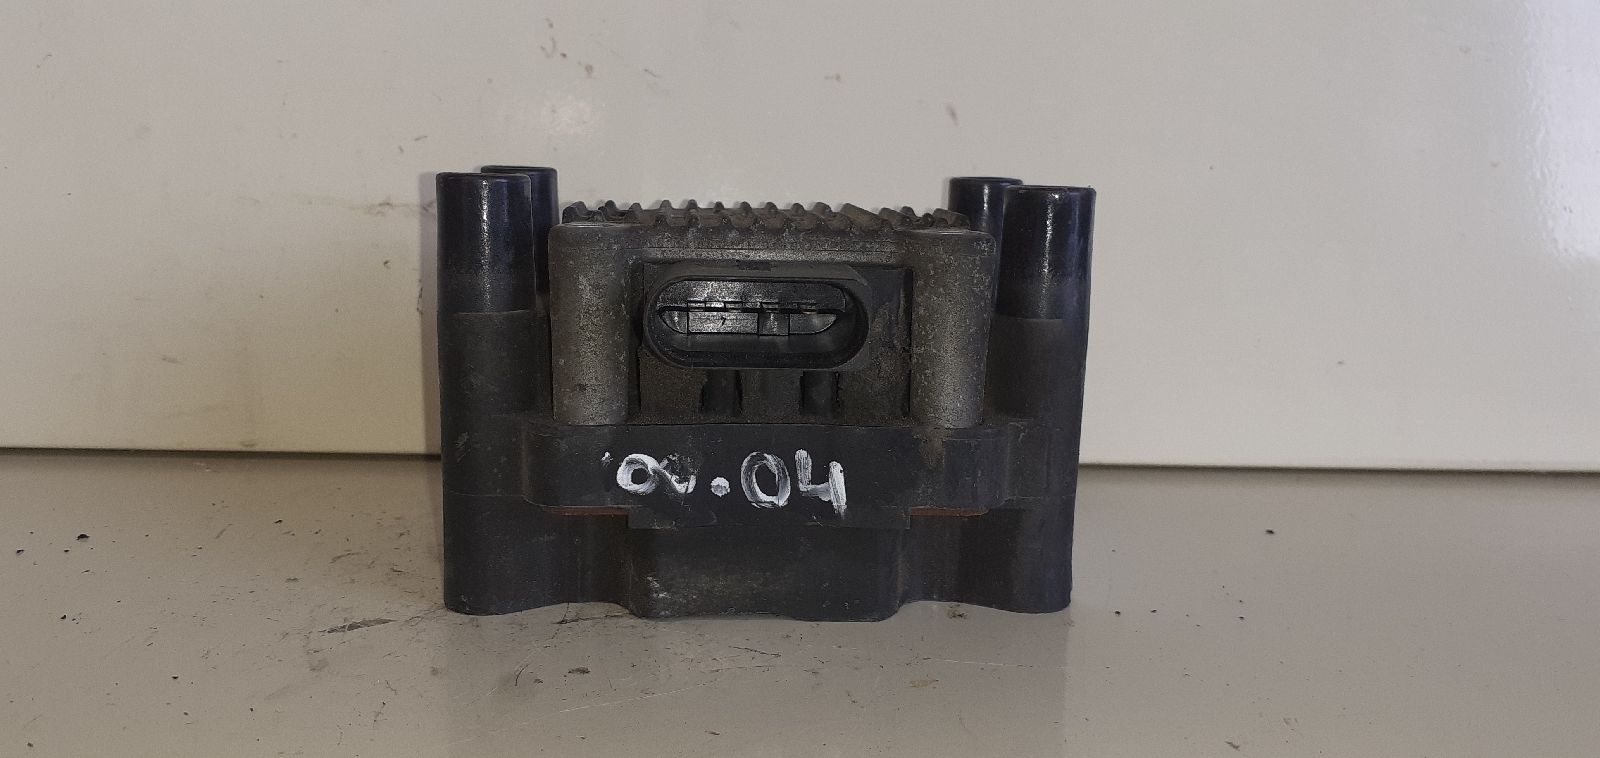 SEAT Arosa 6H (1997-2004) High Voltage Ignition Coil 0329054106B 25280760